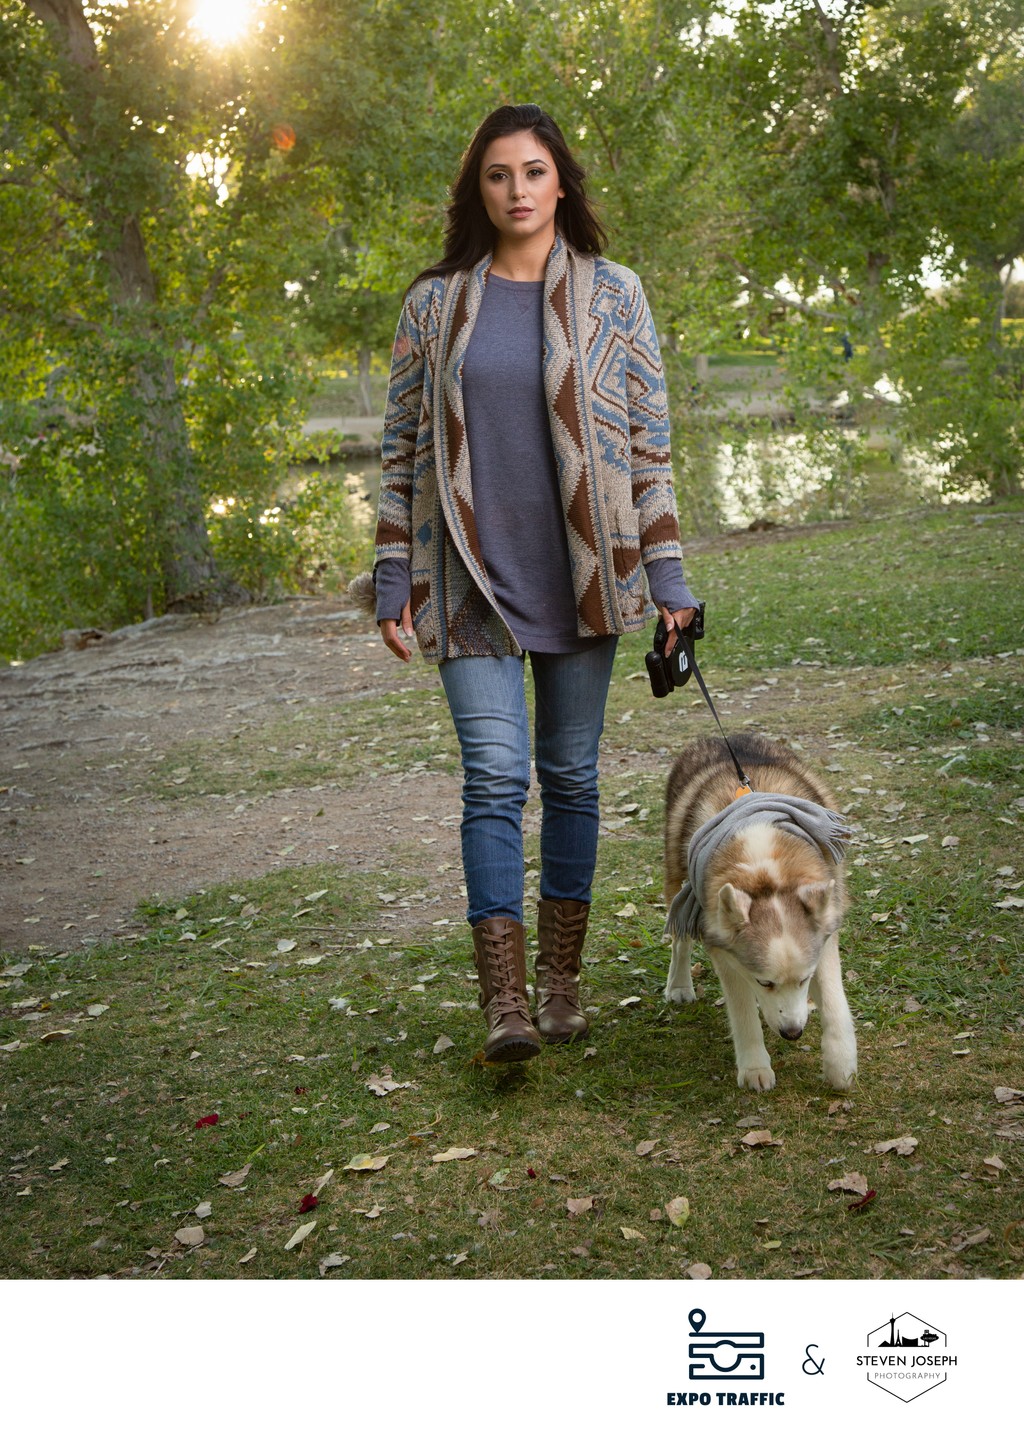 Beautiful auburn-haired woman walking with her dog in a park, fall sweater